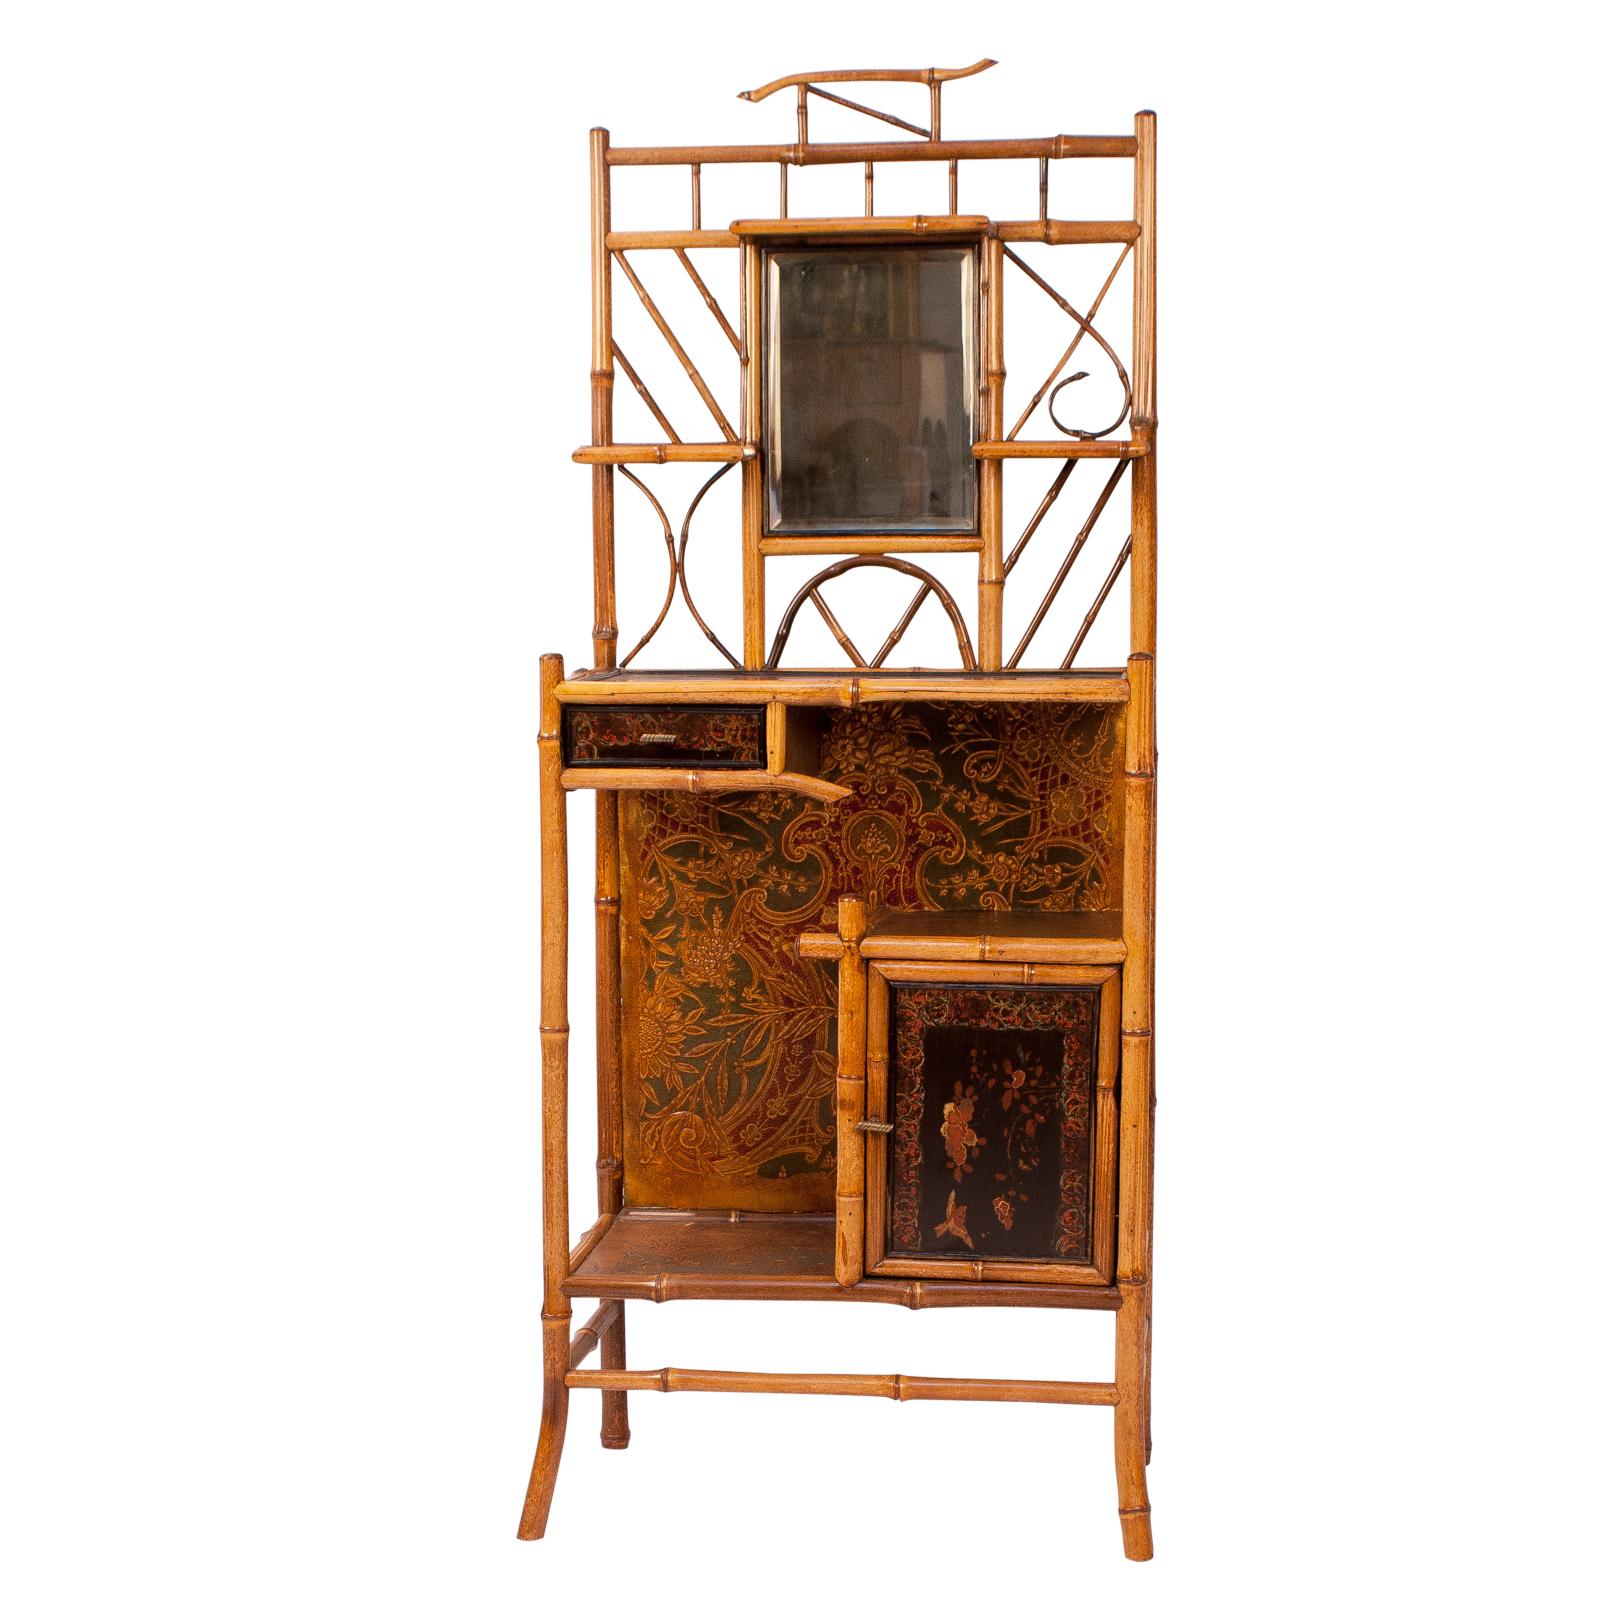 A late 19th century English bamboo shelf with lacquered panels and a dressing mirror, circa 1880. These pieces where popular most of the 19th century and often included lacquered panels inspired by Japanese and Chinese designs. Bamboo furniture was